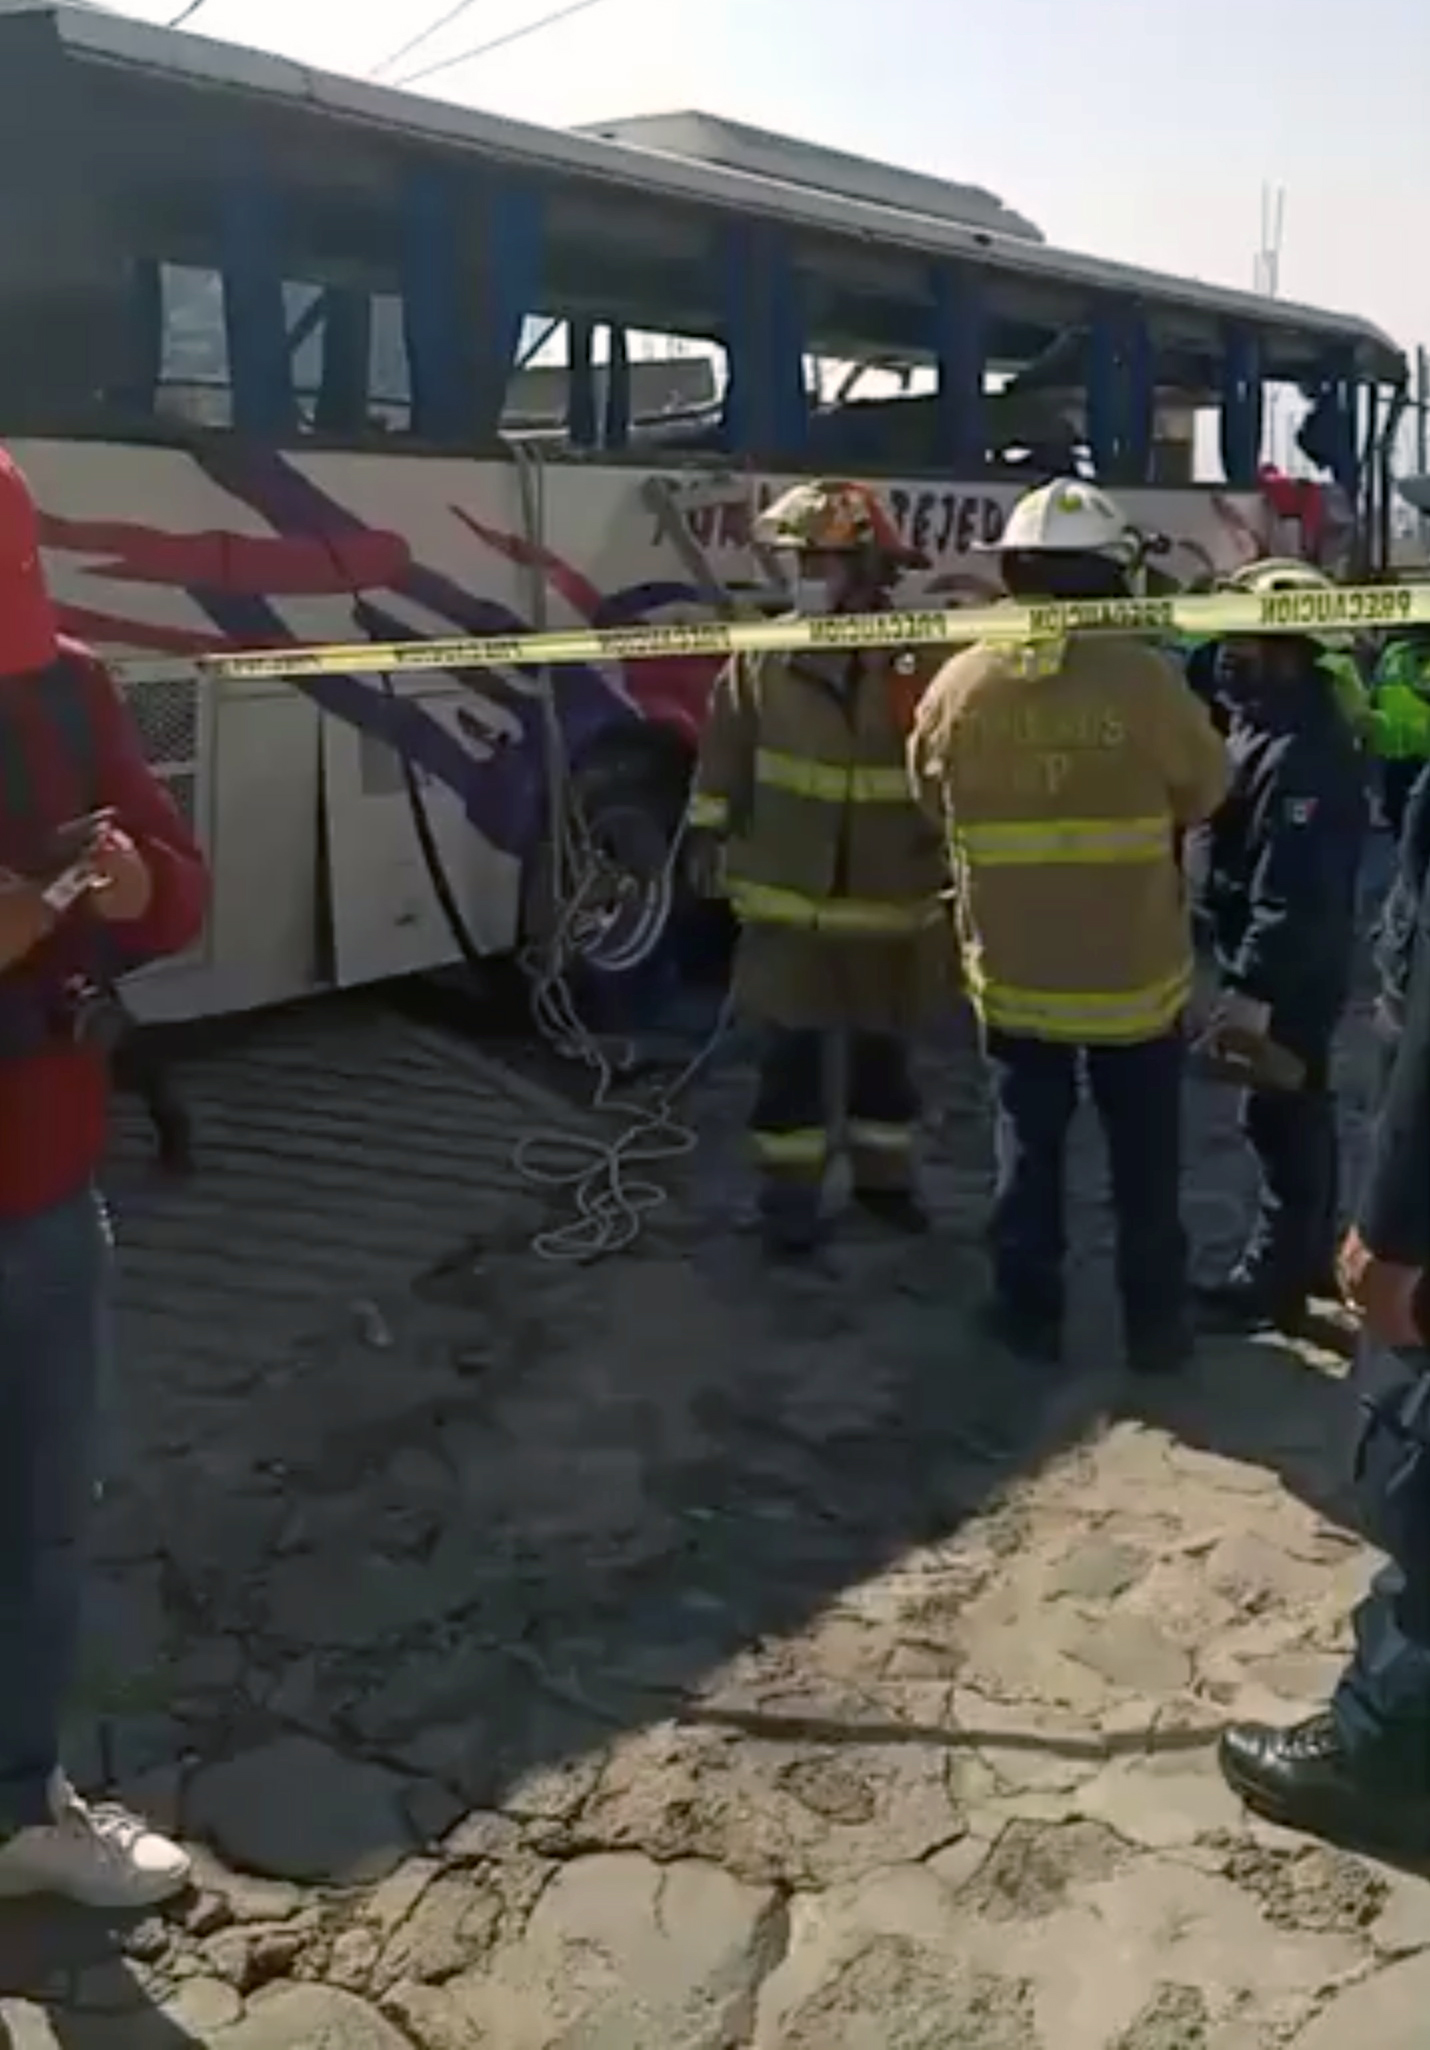 PHOTO: Firefighters stand next to a bus at a crash site in Joquicingo, near Mexico City, Nov. 26, 2021, in this screen grab obtained from a social media video.